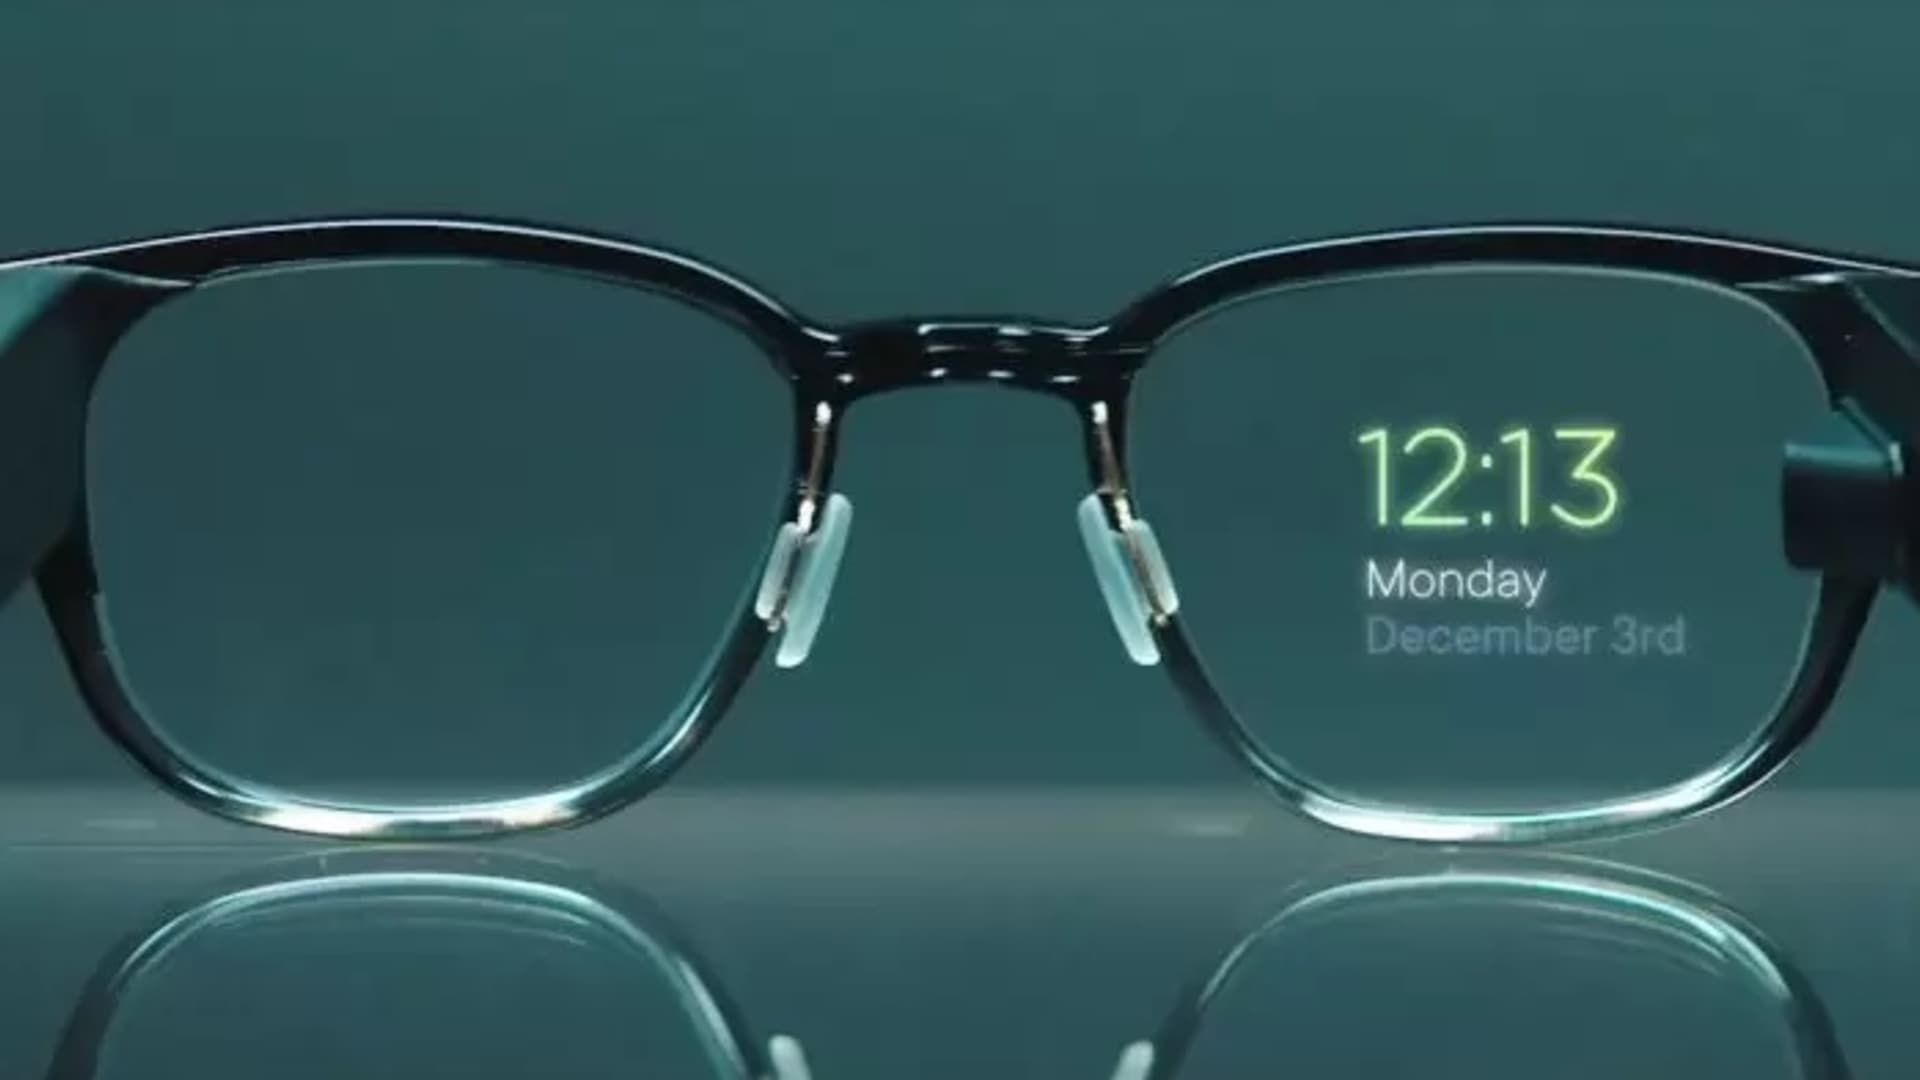 What Are Smart Glasses?